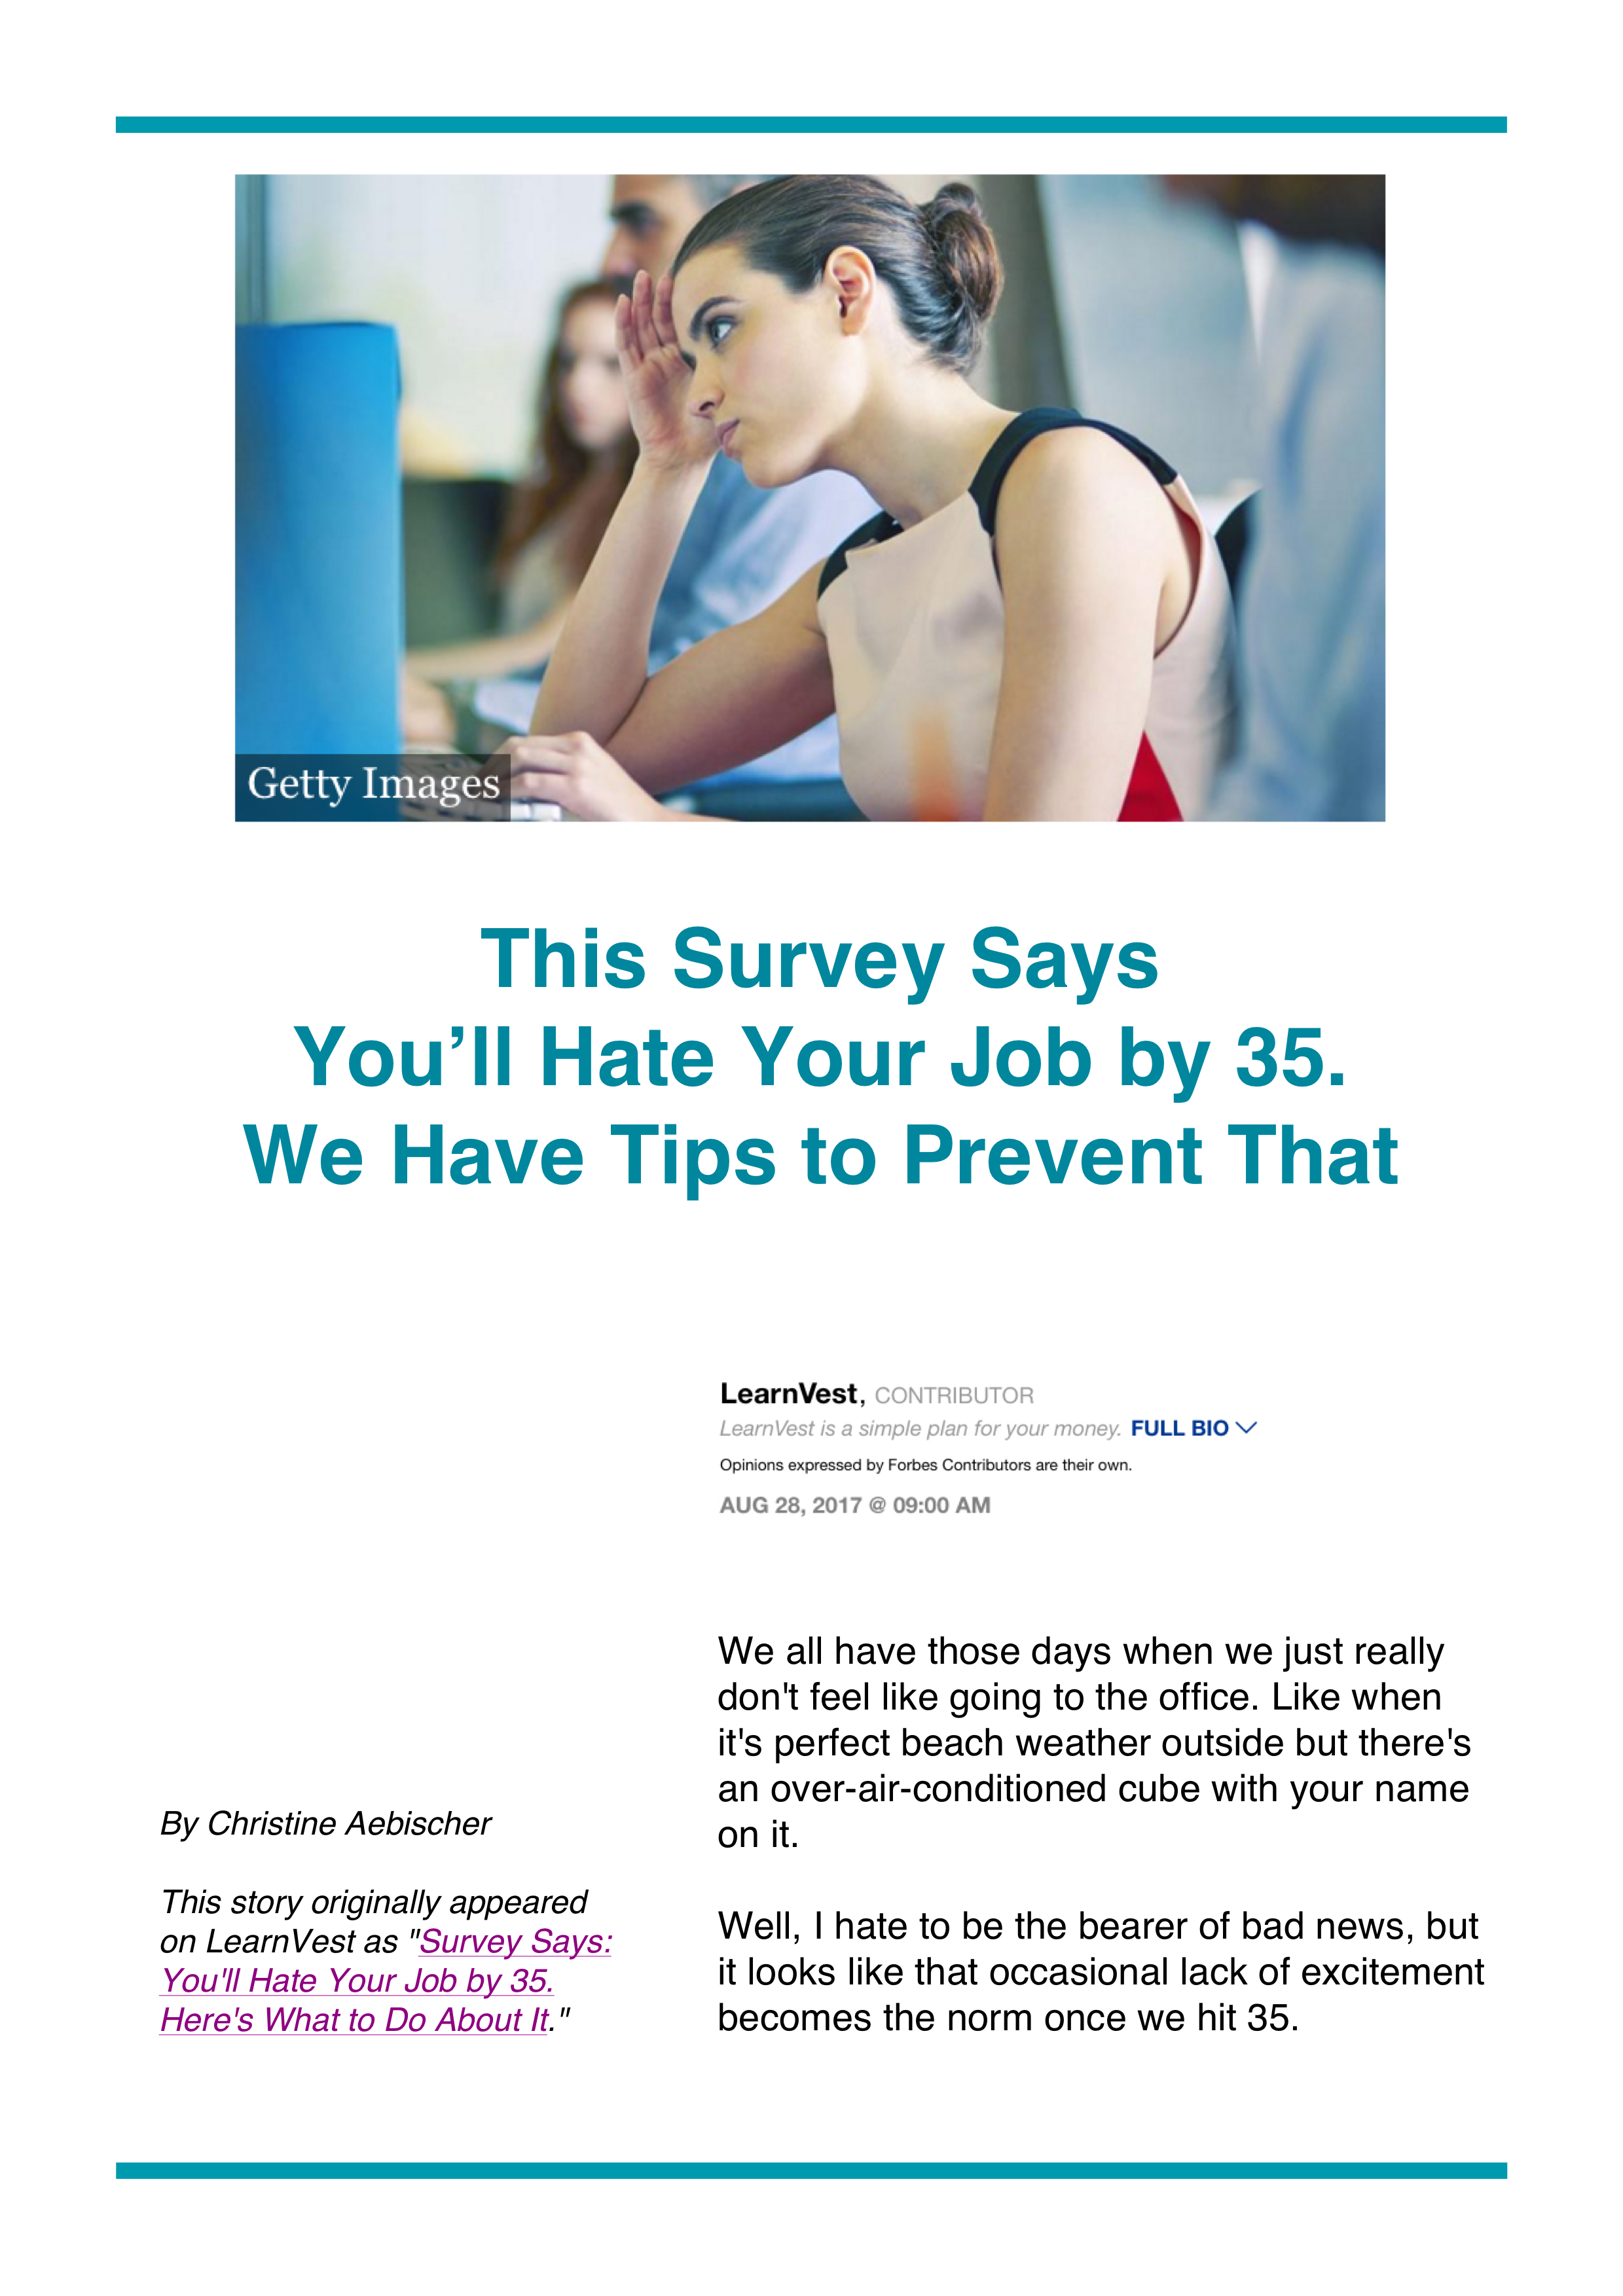 This Survey Says You’ll Hate Your Job by 35. We Have Tips to Prevent That